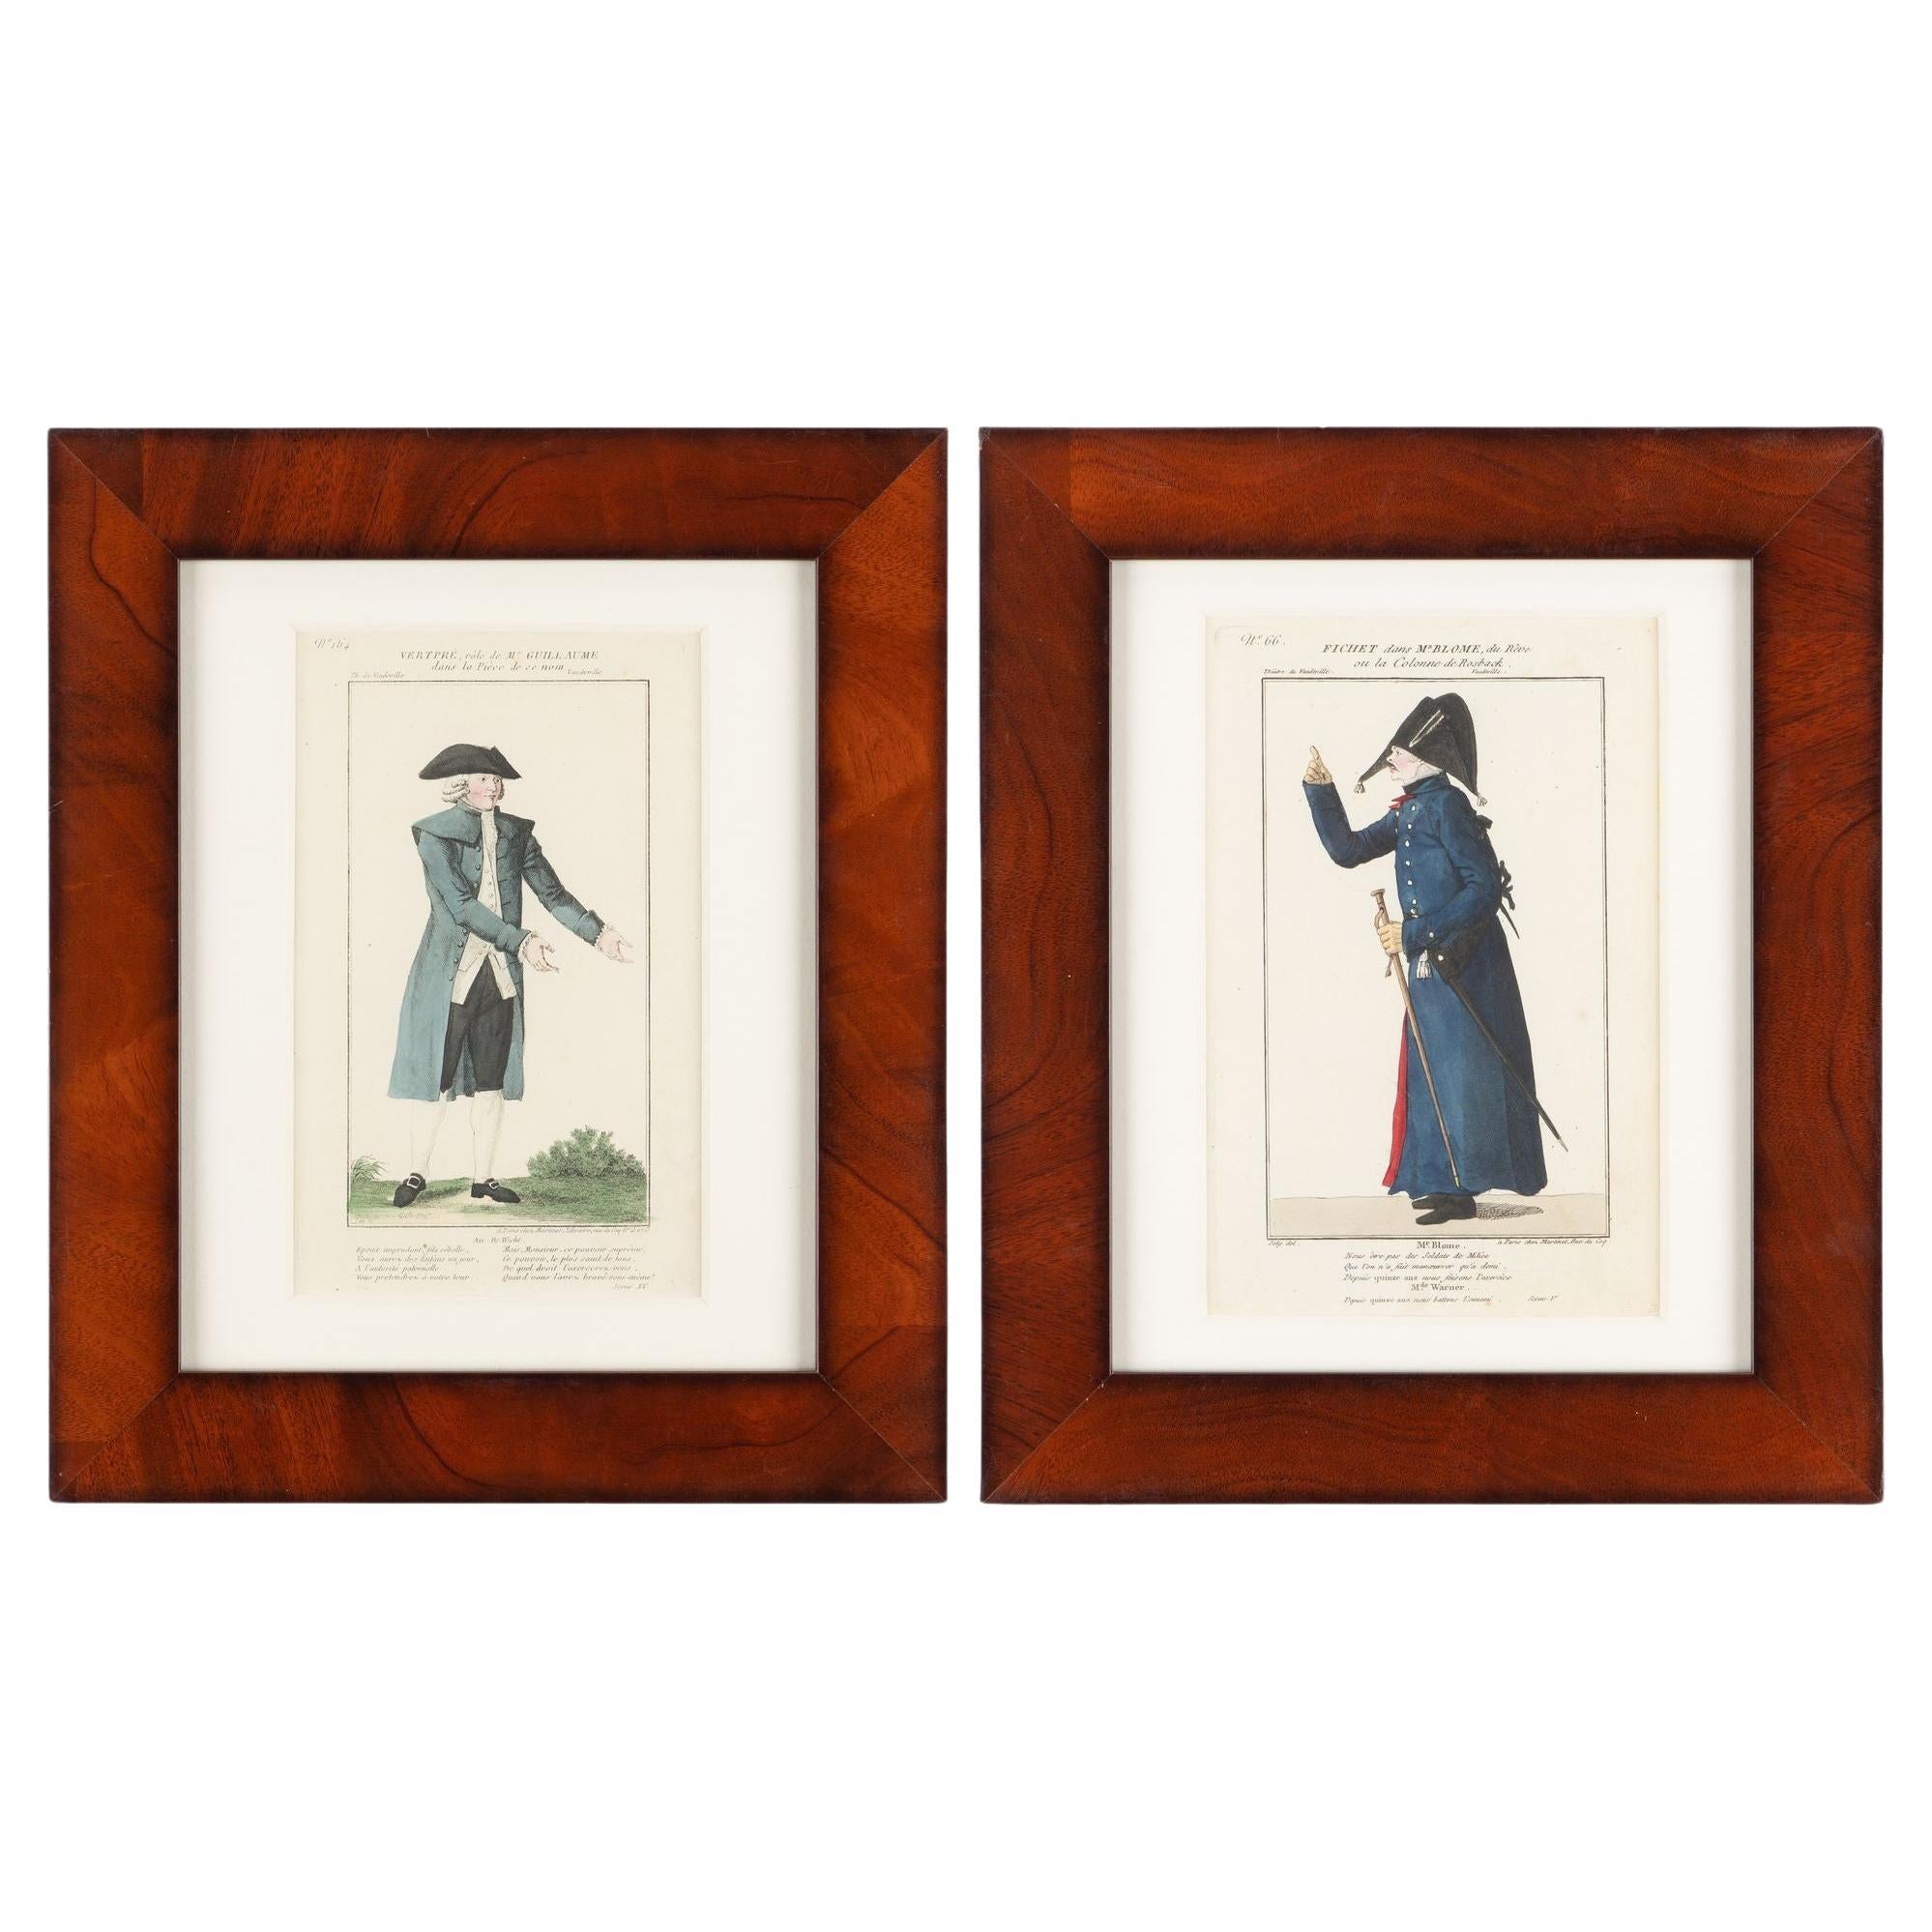 Pair of French hand colored theatrical engravings, c. 1800